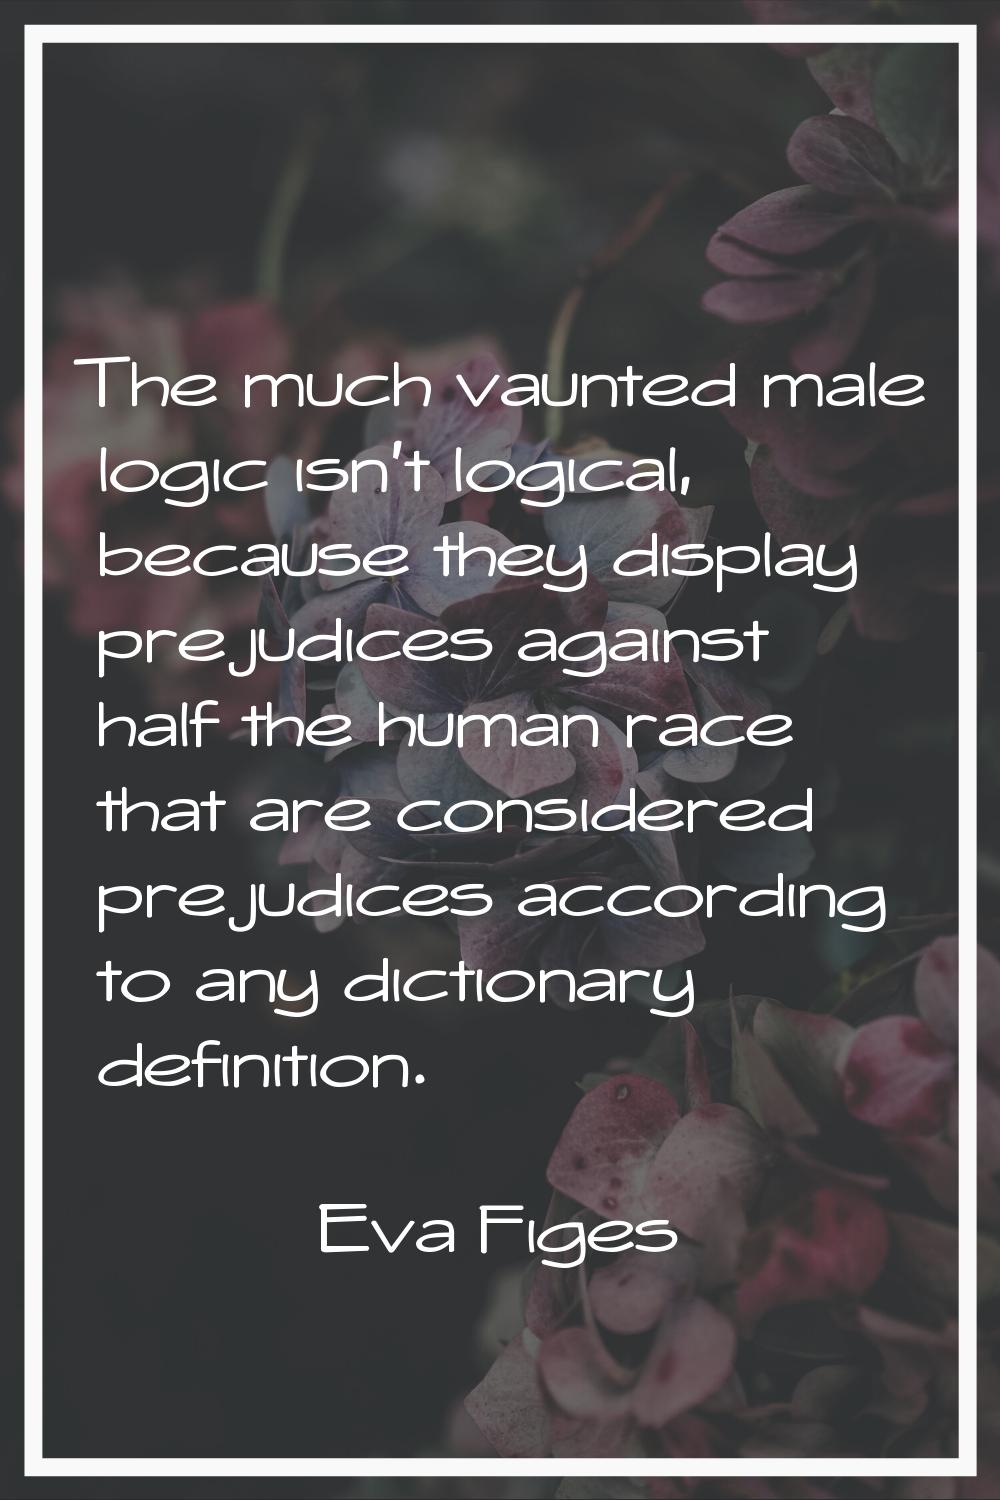 The much vaunted male logic isn't logical, because they display prejudices against half the human r